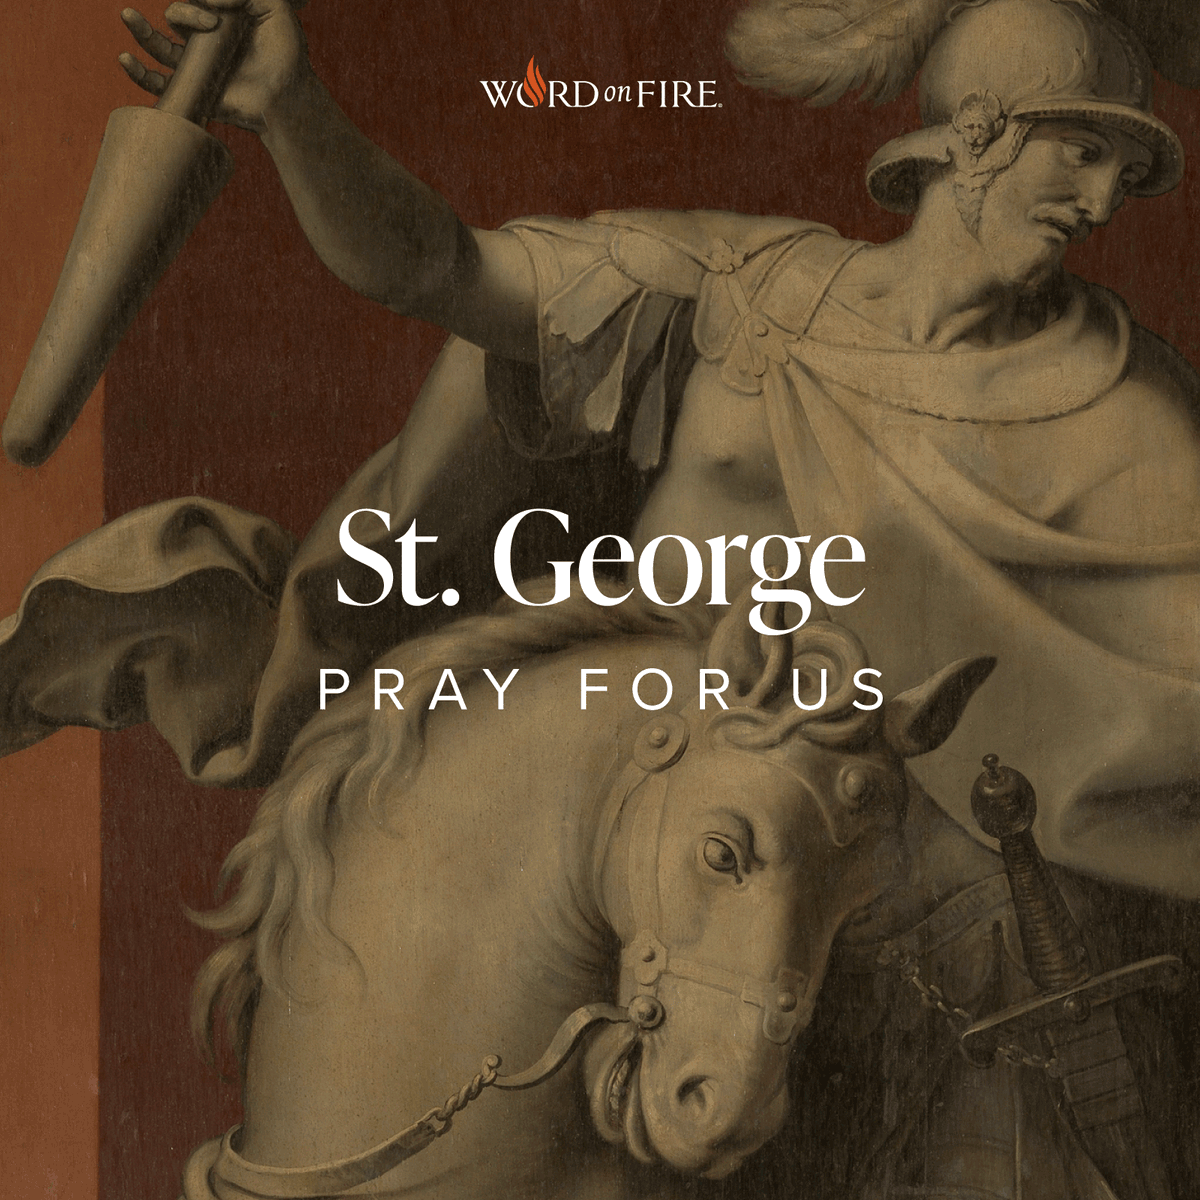 St. George, pray for us!